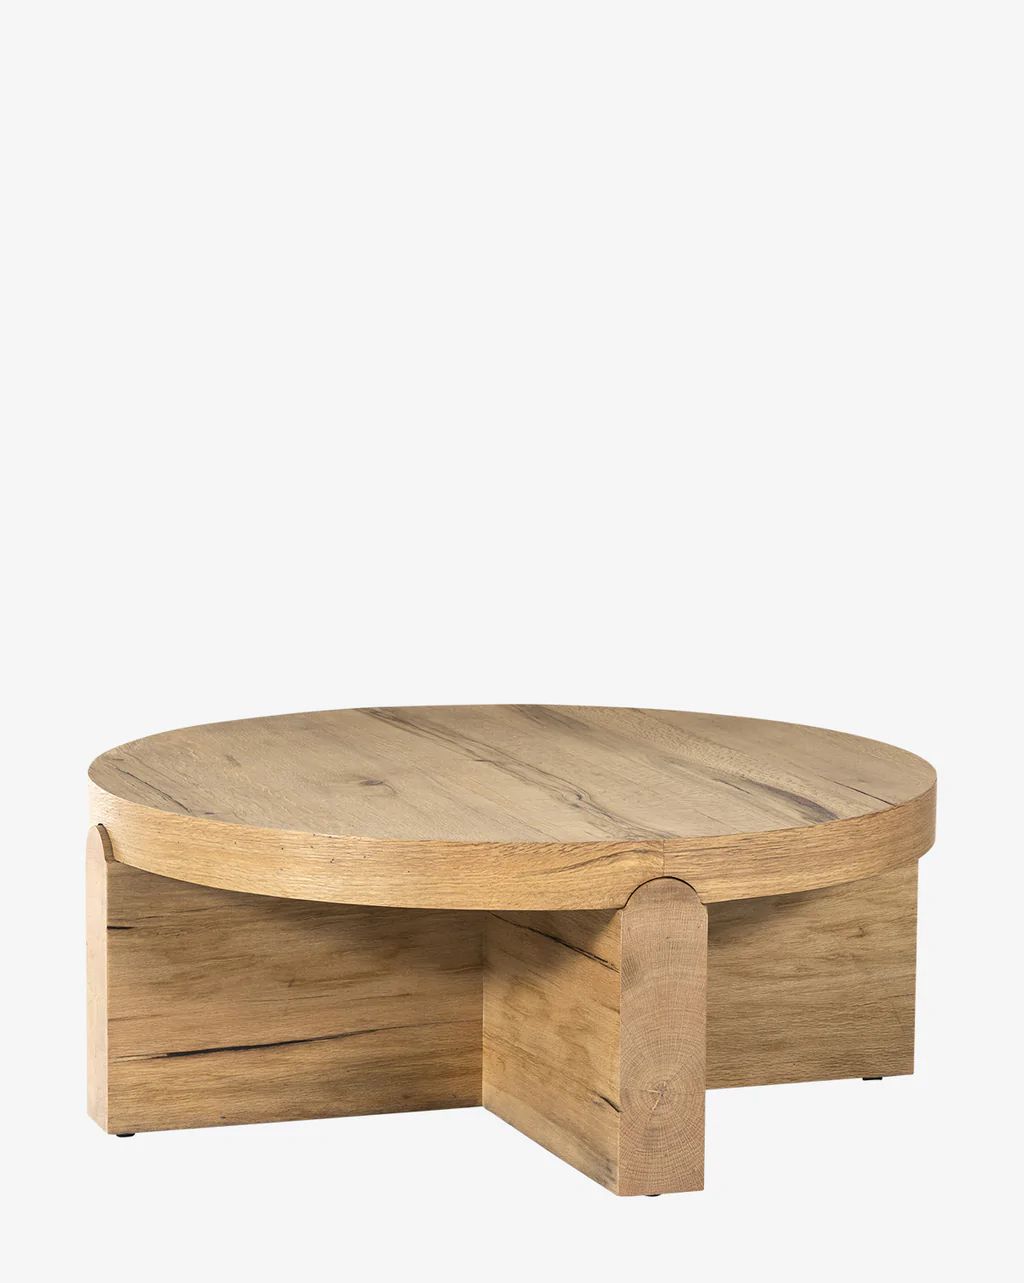 Donel Coffee Table | McGee & Co.